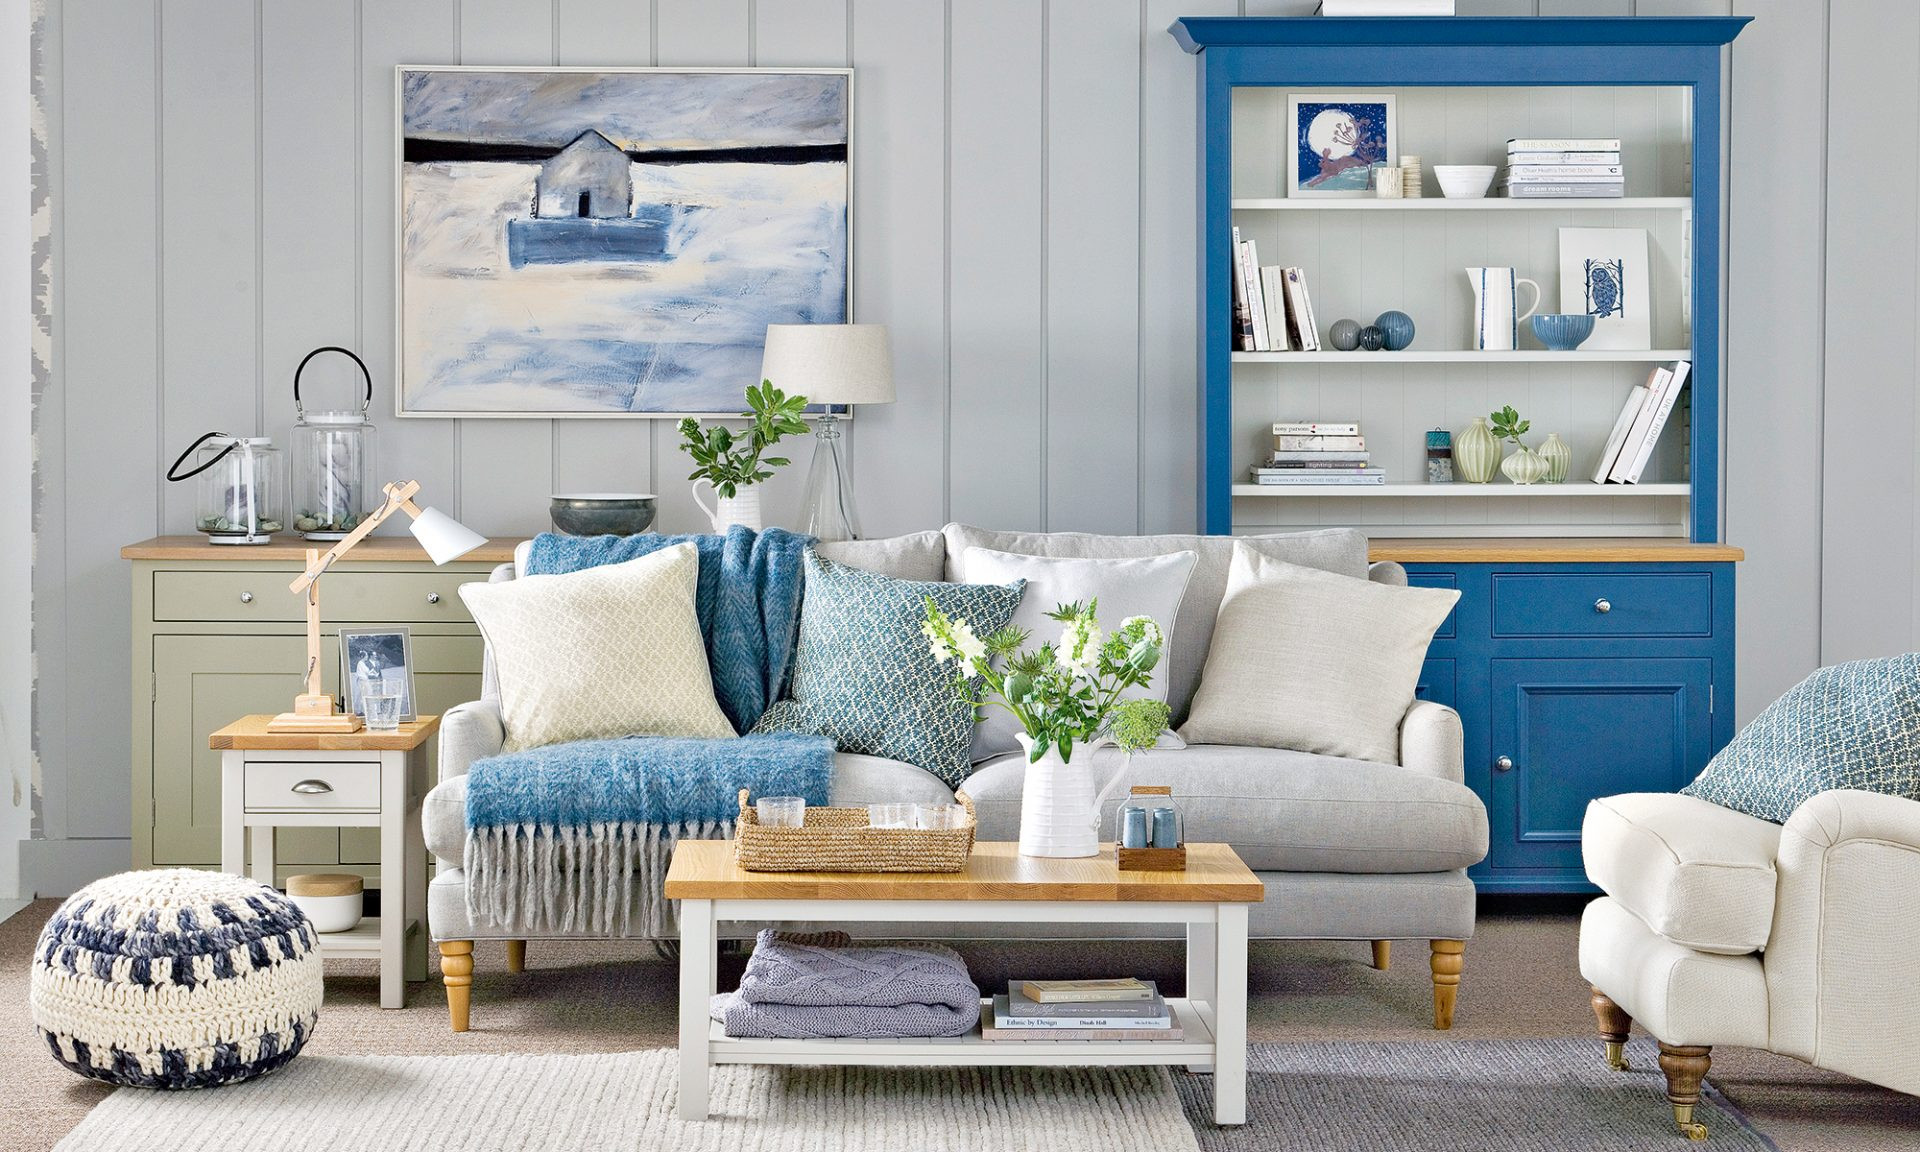 Beach Curtains For Living Room
 Coastal living rooms to recreate carefree beach days